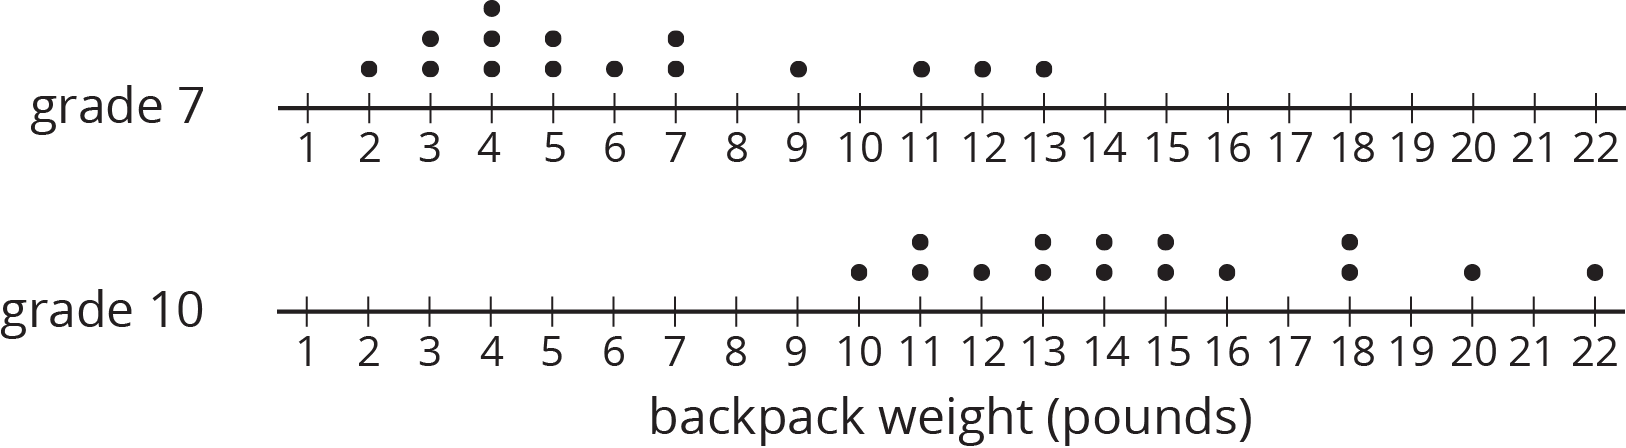 Two dot plots for “backpack weight in pounds” are labeled "grade 7" and "grade 10," and the numbers 1 through 22 are indicated. The data are as follows:  Grade 7: 2 pounds, 1 dot. 3 pounds, 2 dots. 4 pounds, 3 dots. 5 pounds, 2 dots. 6 pounds, 1 dot. 7 pounds, 2 dots. 9 pounds, 1 dot. 11 pounds, 1 dot. 12 pounds, 1 dot. 13 pounds, 1 dot.  Grade 10: 10 pounds, 1 dot. 11 pounds, 2 dots. 12 pounds, 1 dot. 13 pounds, 2 dots. 14 pounds, 2 dots. 15 pounds, 2 dots. 16 pounds, 1 dot. 18 pounds, 2 dots. 20 pounds, 1 dot. 22 pounds, 1 dot.